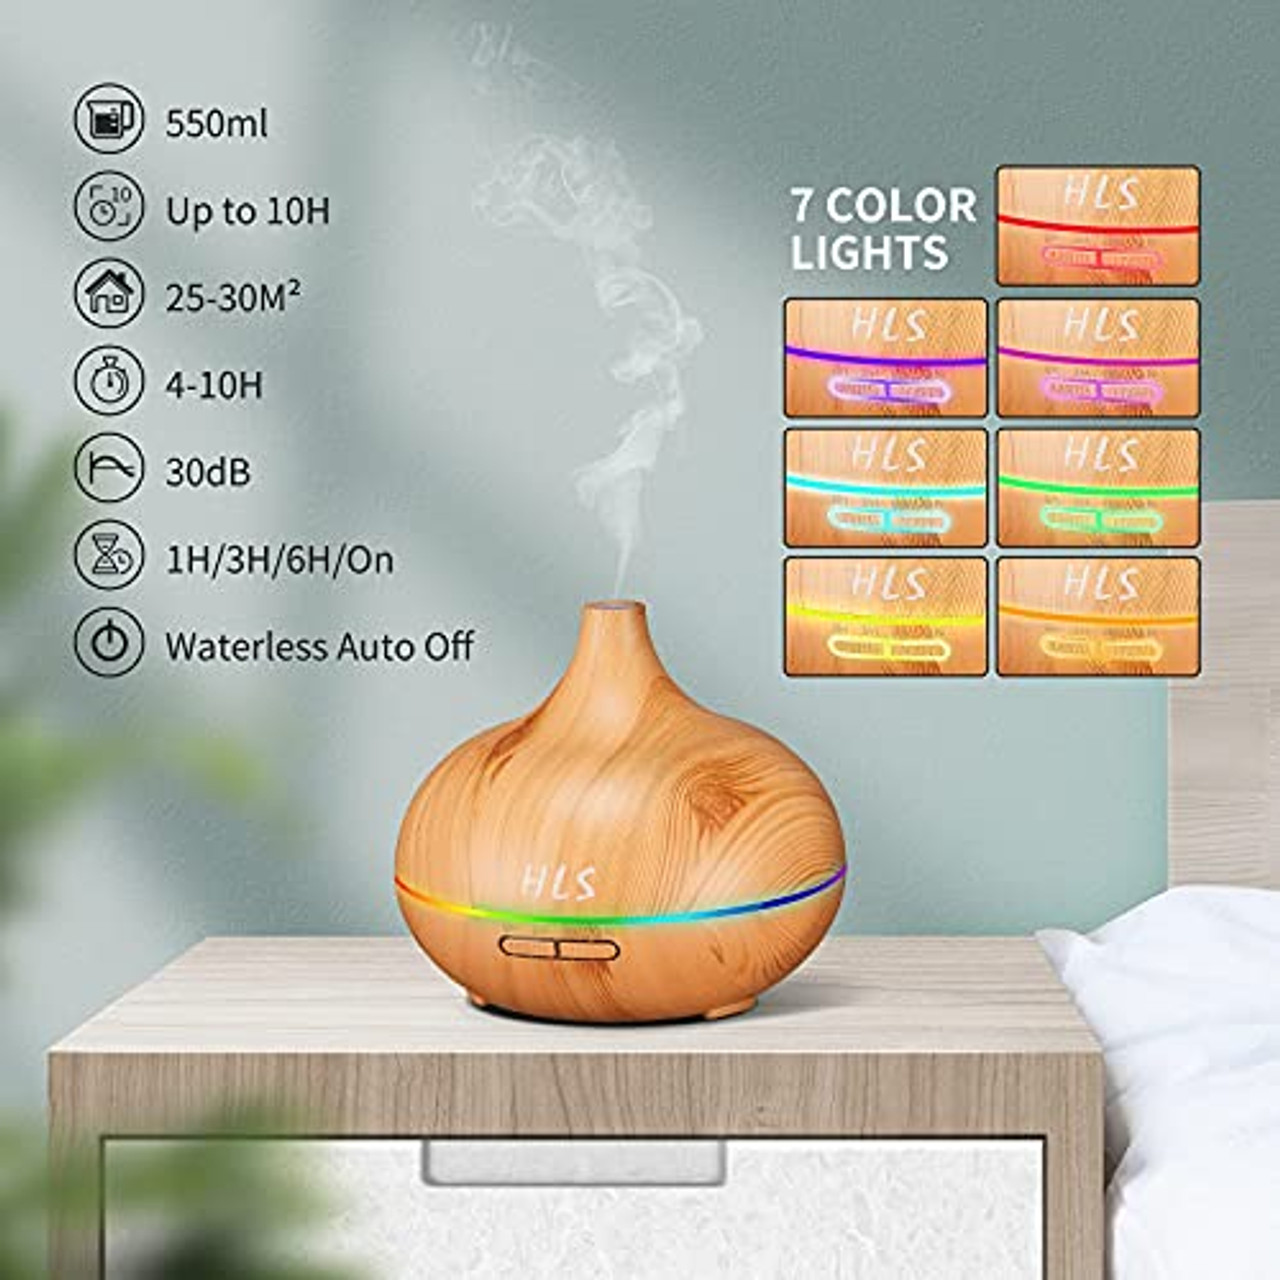 Essential Oil Diffusers for Home with Top 10 Oil Diffuser Gift Sets, 550ml  Aroma Diffuser for Essential Oils Large Room, Ultrasonic Cool Mist Diffuser